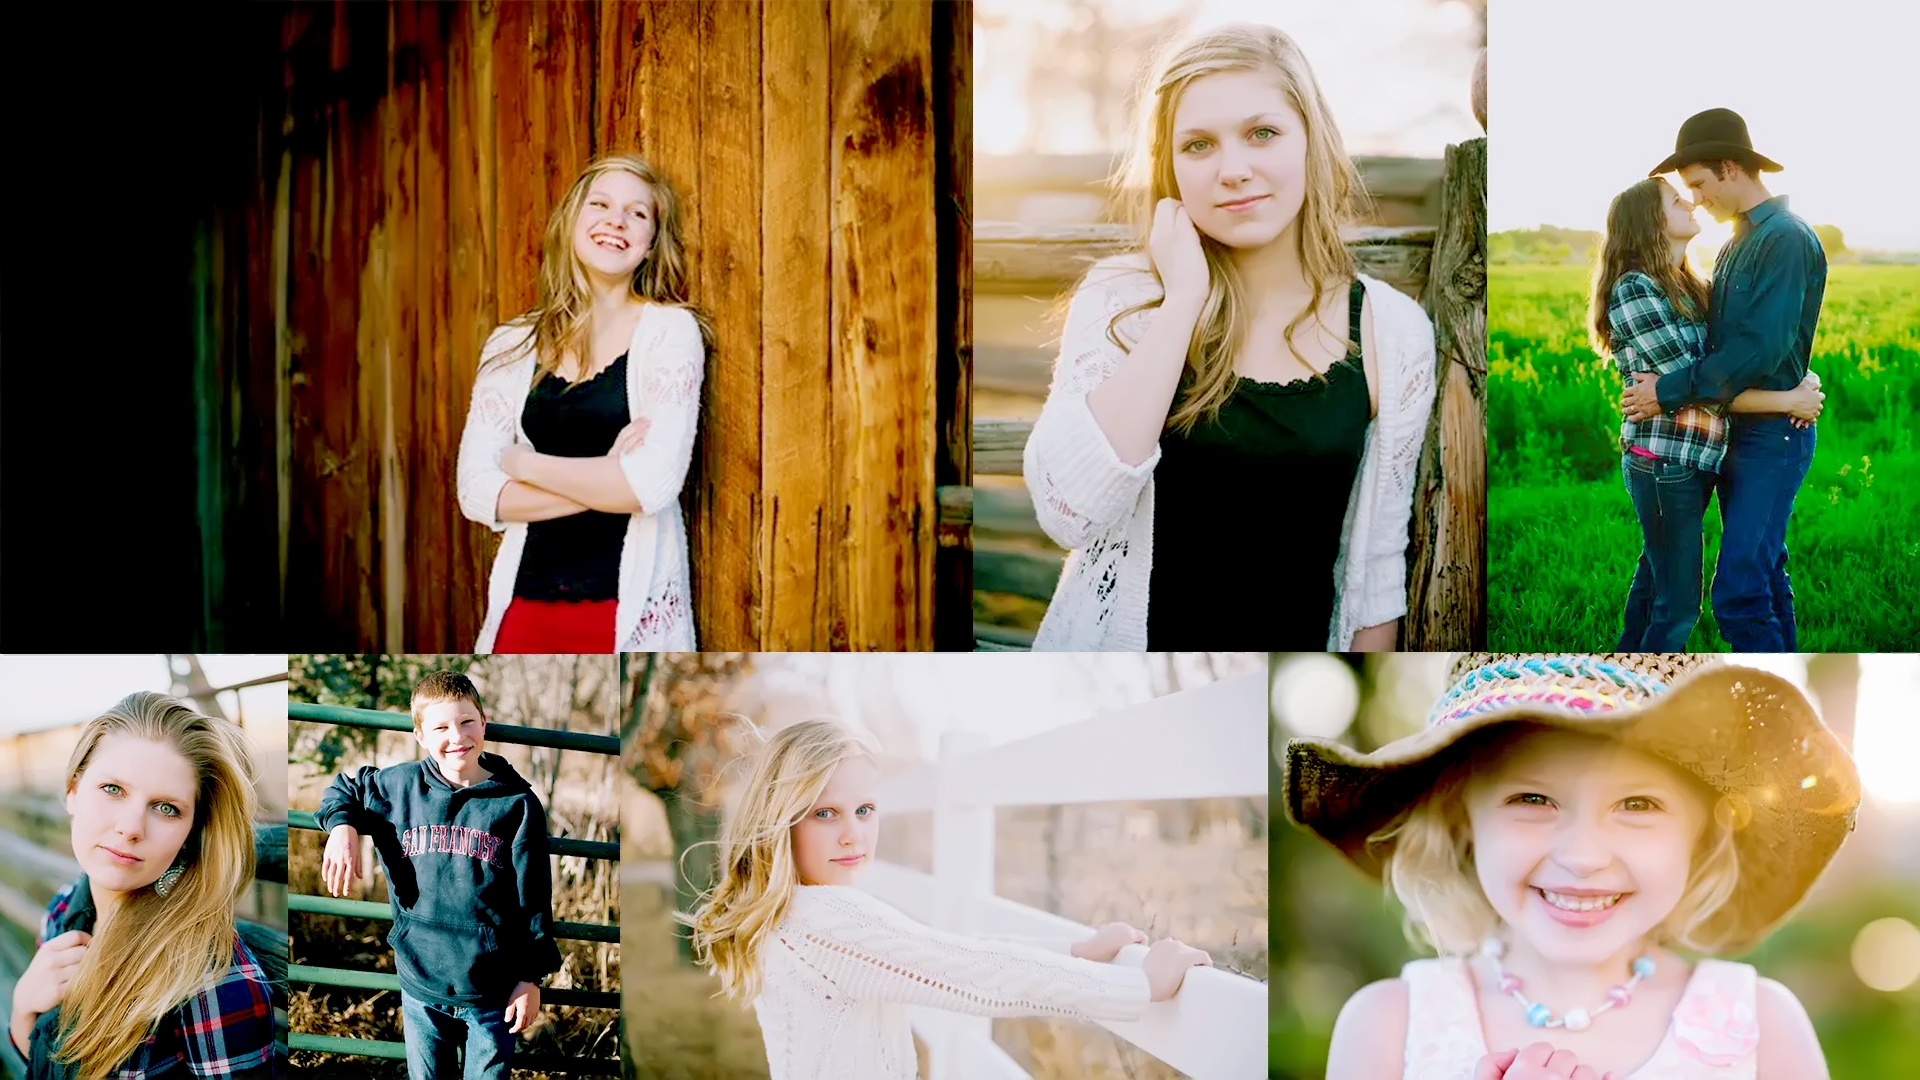 Sunshine: The Most Beautiful And Natural Light Source For Awesome Portraits